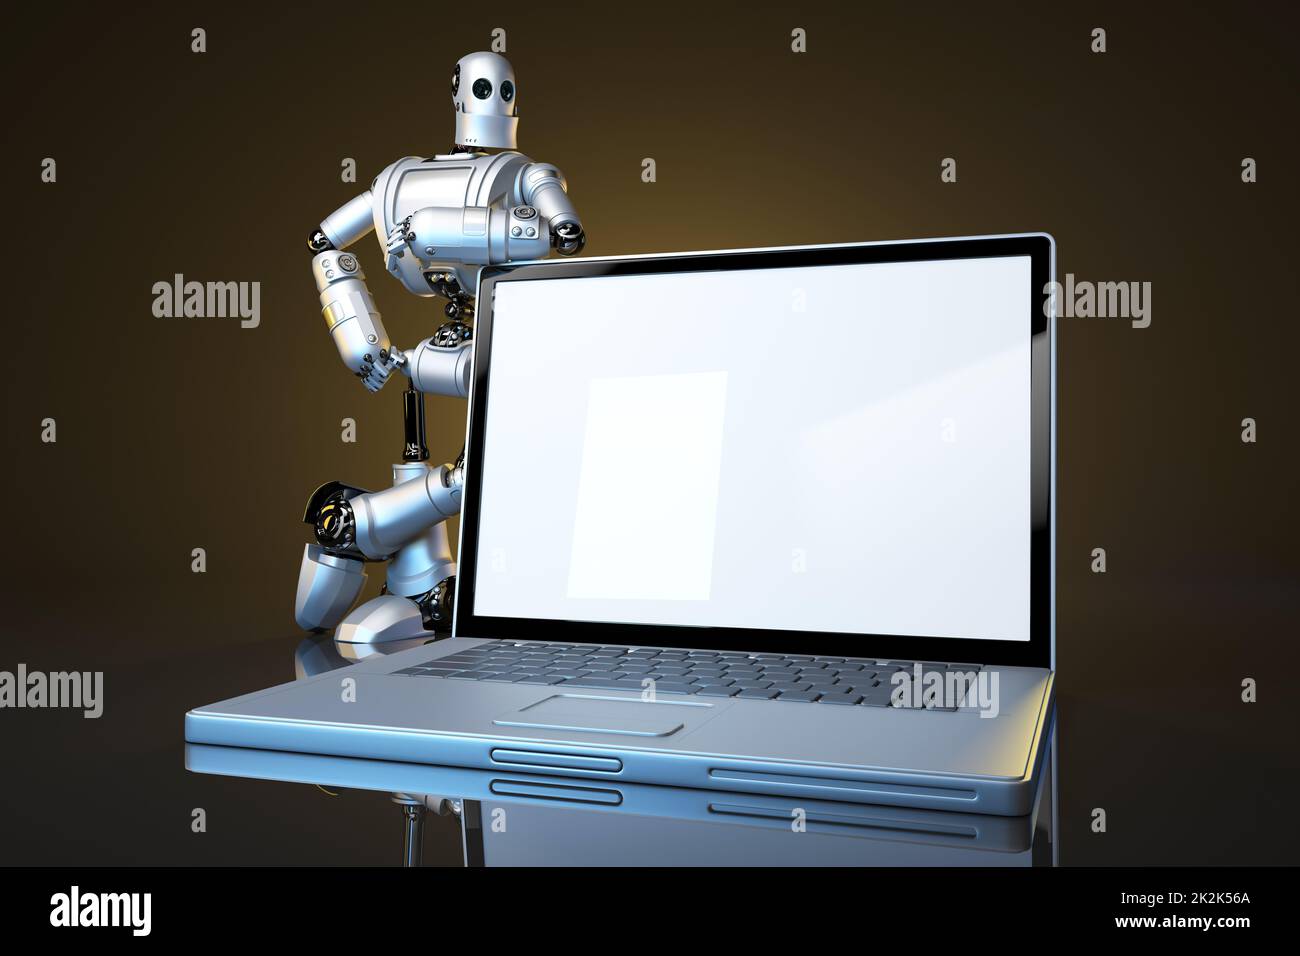 Robot with blank screen laptop. Contains clipping path of screen and entire scene Stock Photo